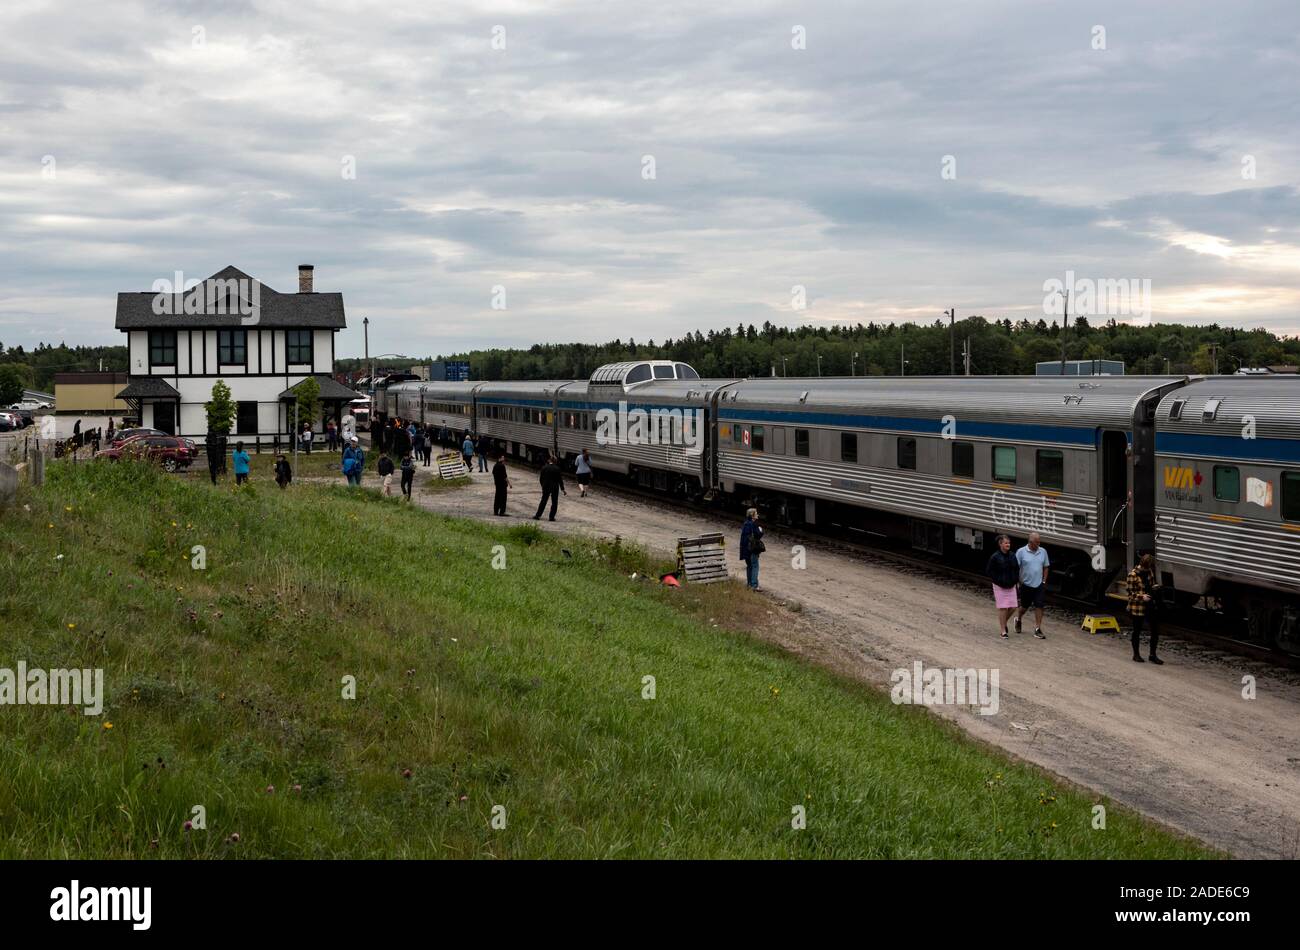 The Canadian, Via Rail’s trans Canada train from Vancouver to Toronto, at Sioux Lookout, a town in north western Ontario, Canada Stock Photo